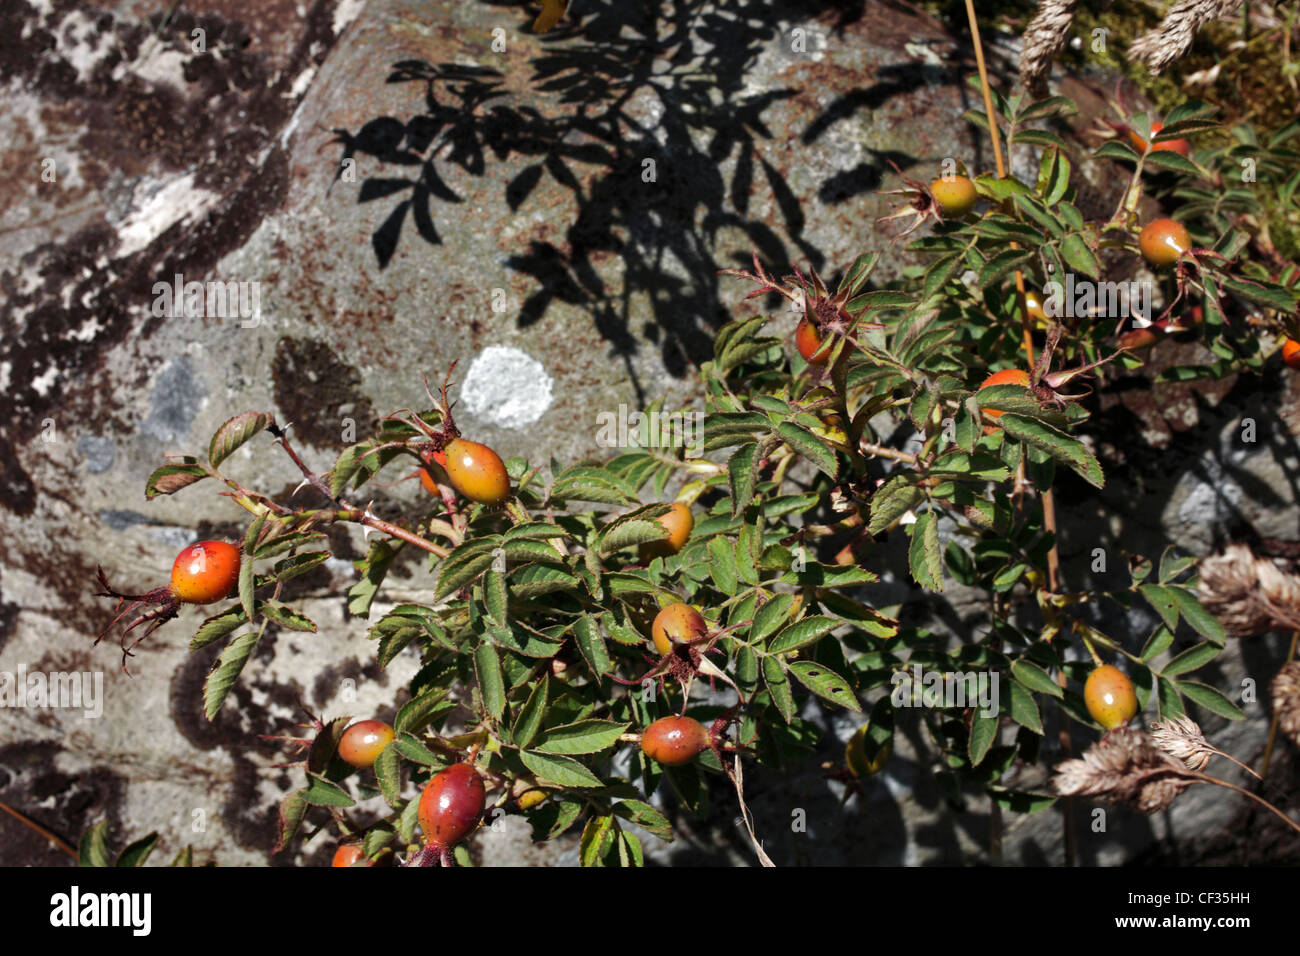 Rose hip (fruits of the rose) growing in an old river bed at St Cyrus. Stock Photo